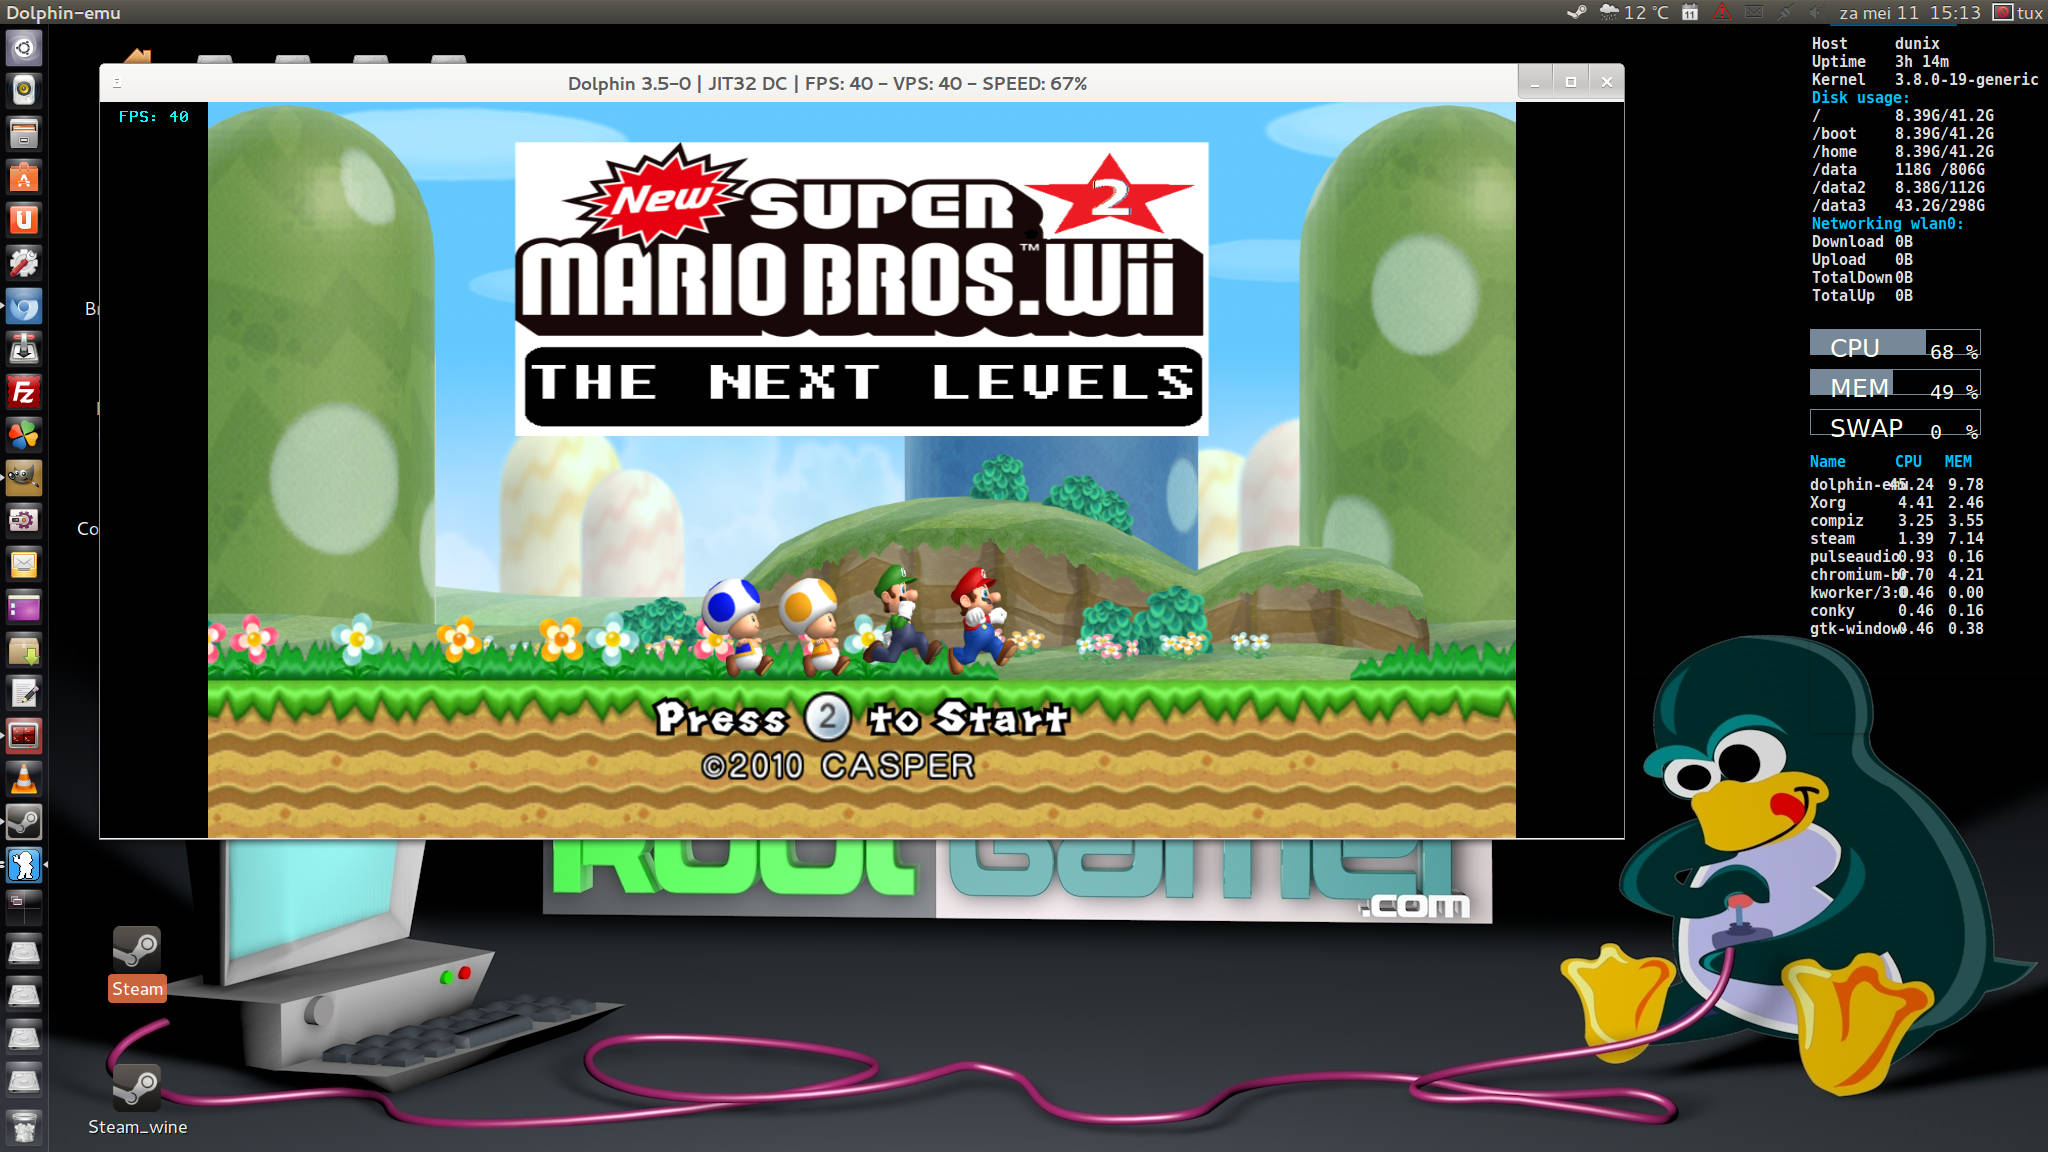 dolphin emulator for wii homebrew channel